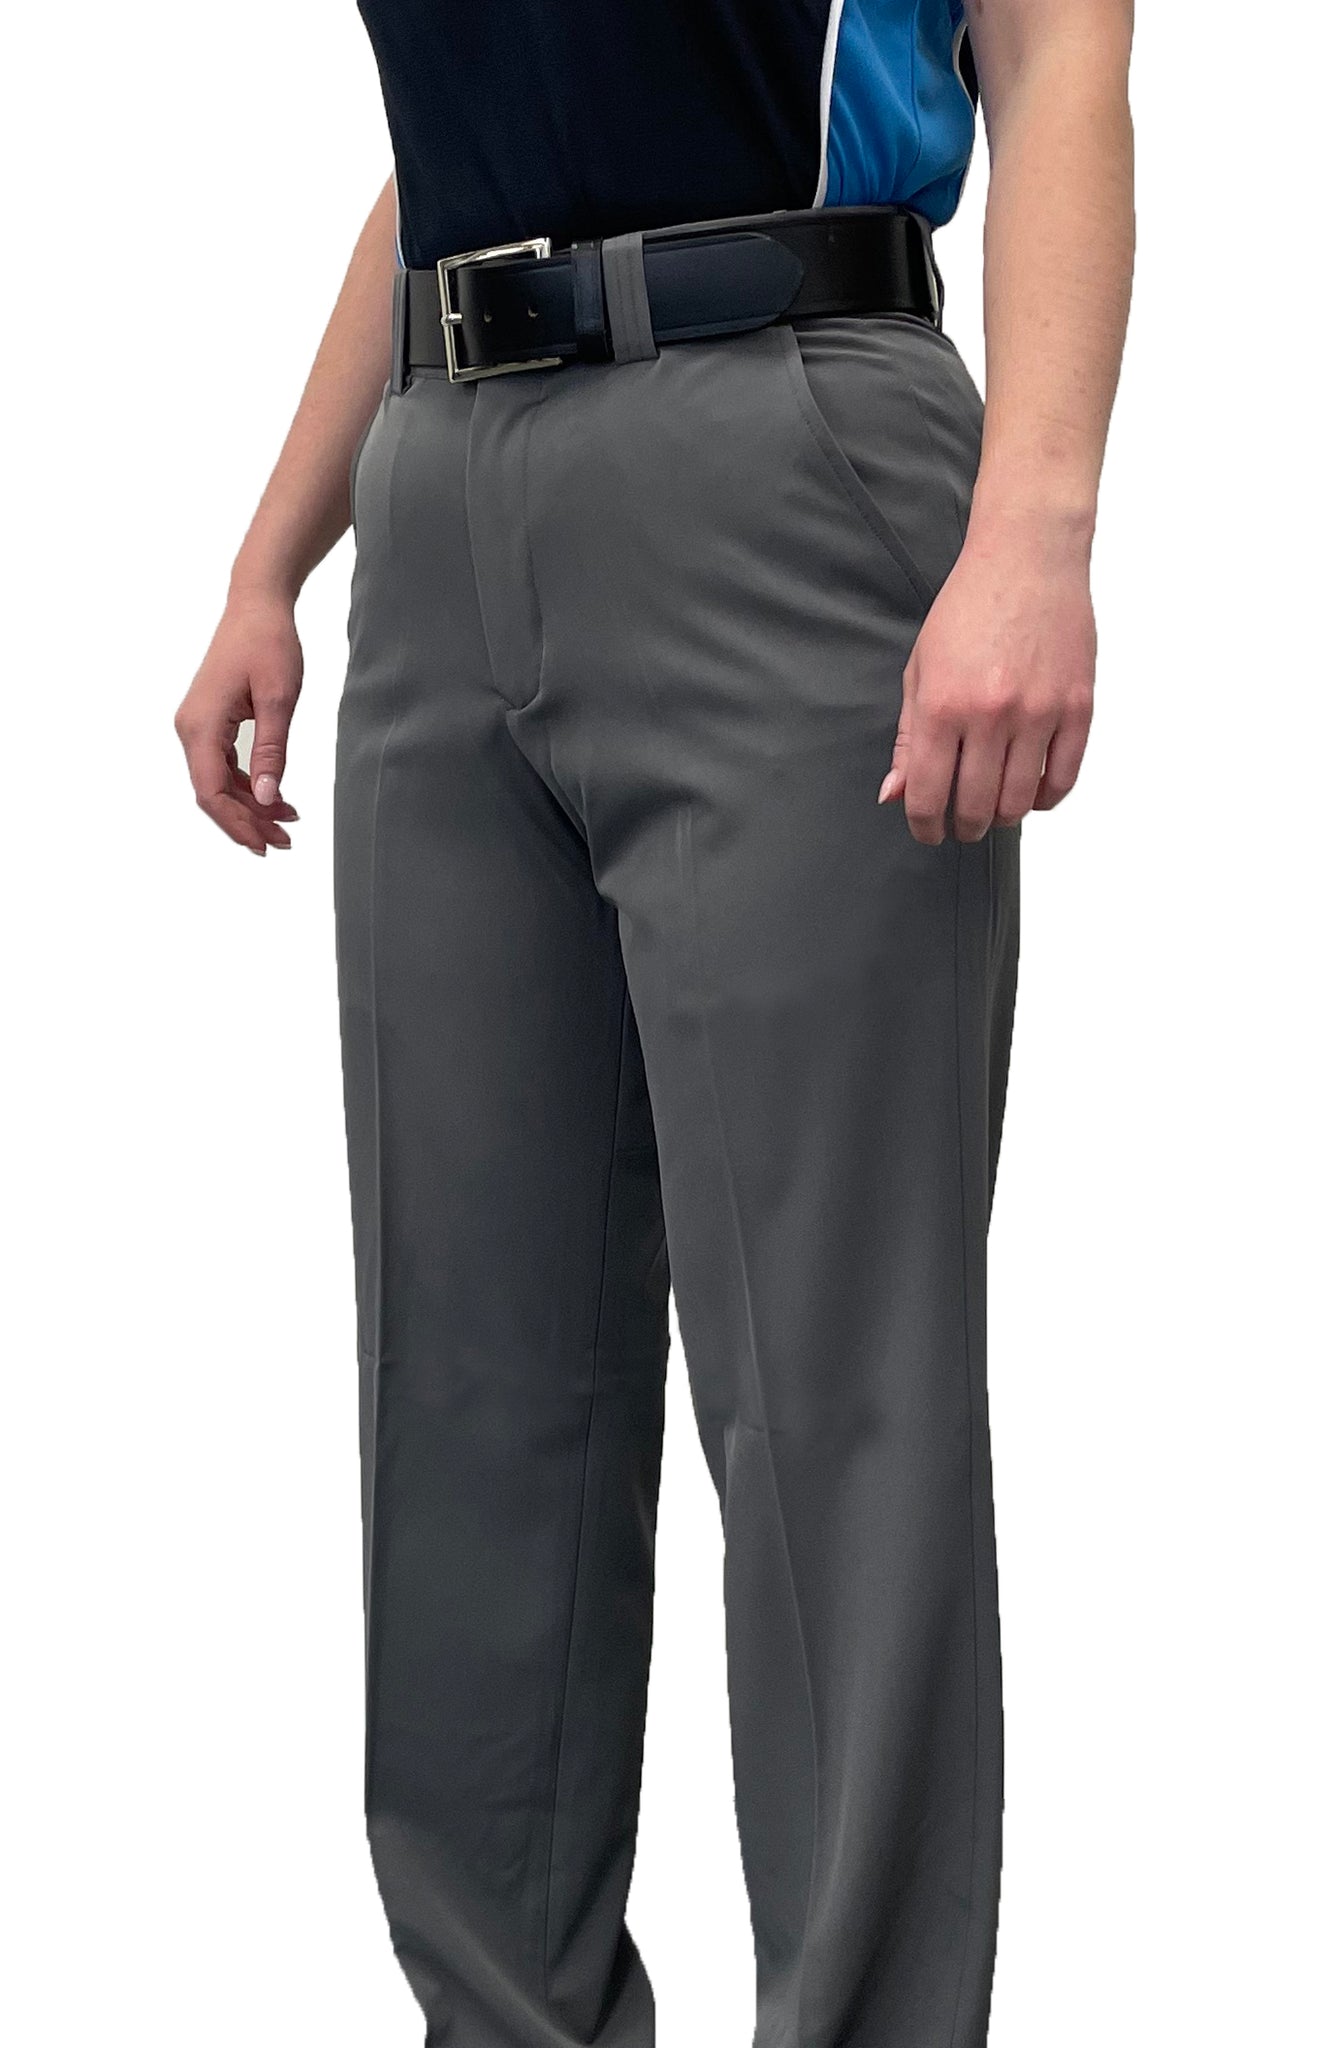 BBS361HG - "NEW" Women's Smitty "4-Way Stretch" FLAT FRONT PLATE PANTS with SLASH POCKETS "NON-EXPANDER"- HEATHER GREY